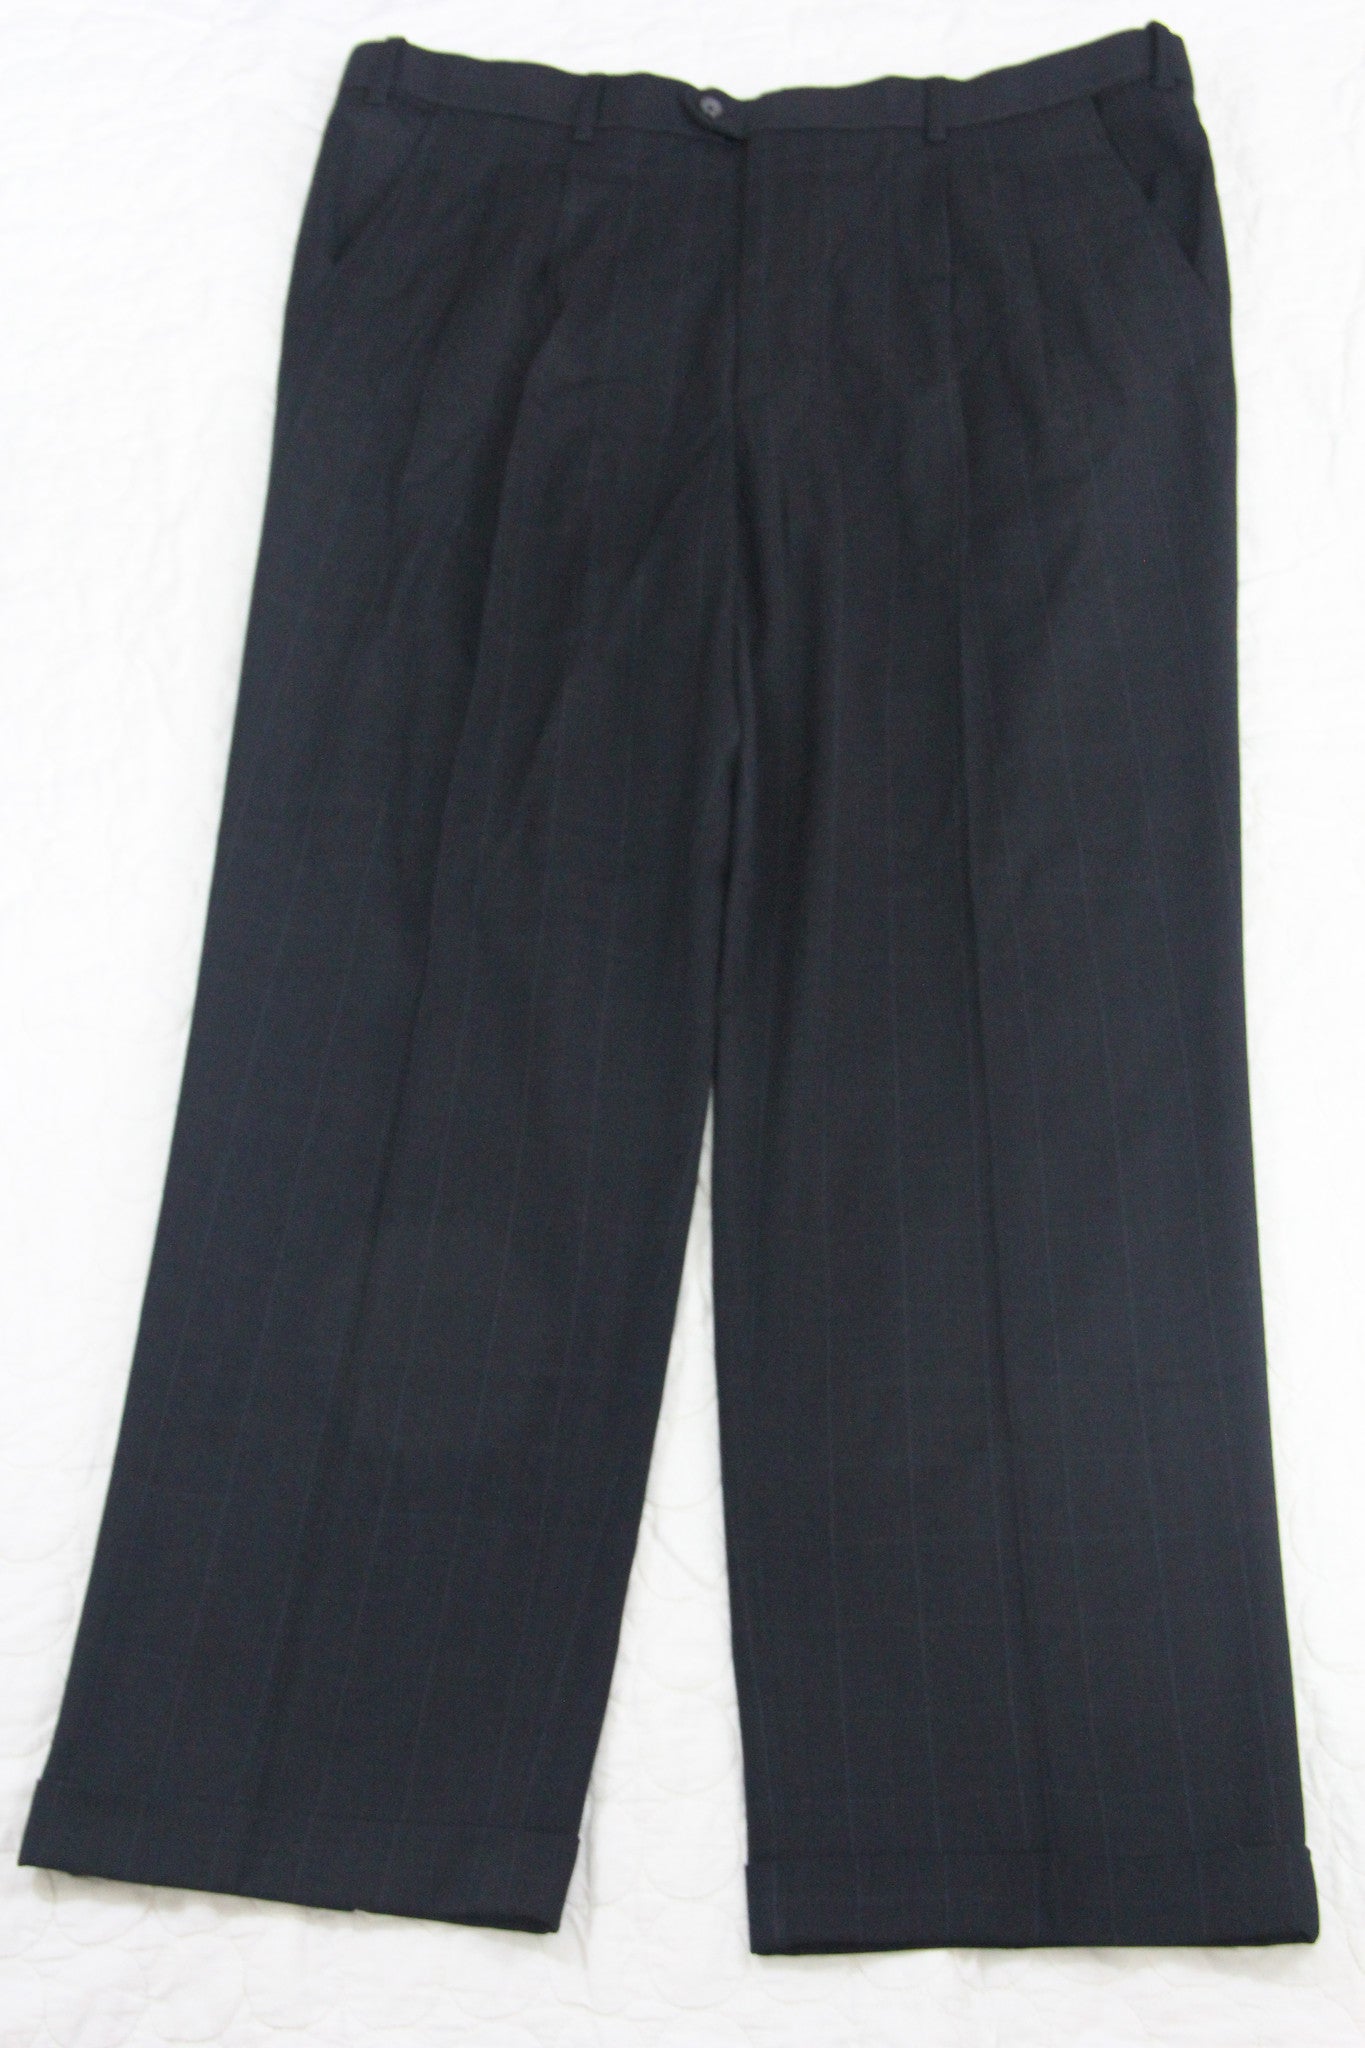 Load image into Gallery viewer, Van Heusen Dress Pants Gray with White Squares Size 40 waist, 32 length (SKU 000164) - Designers On A Dime
